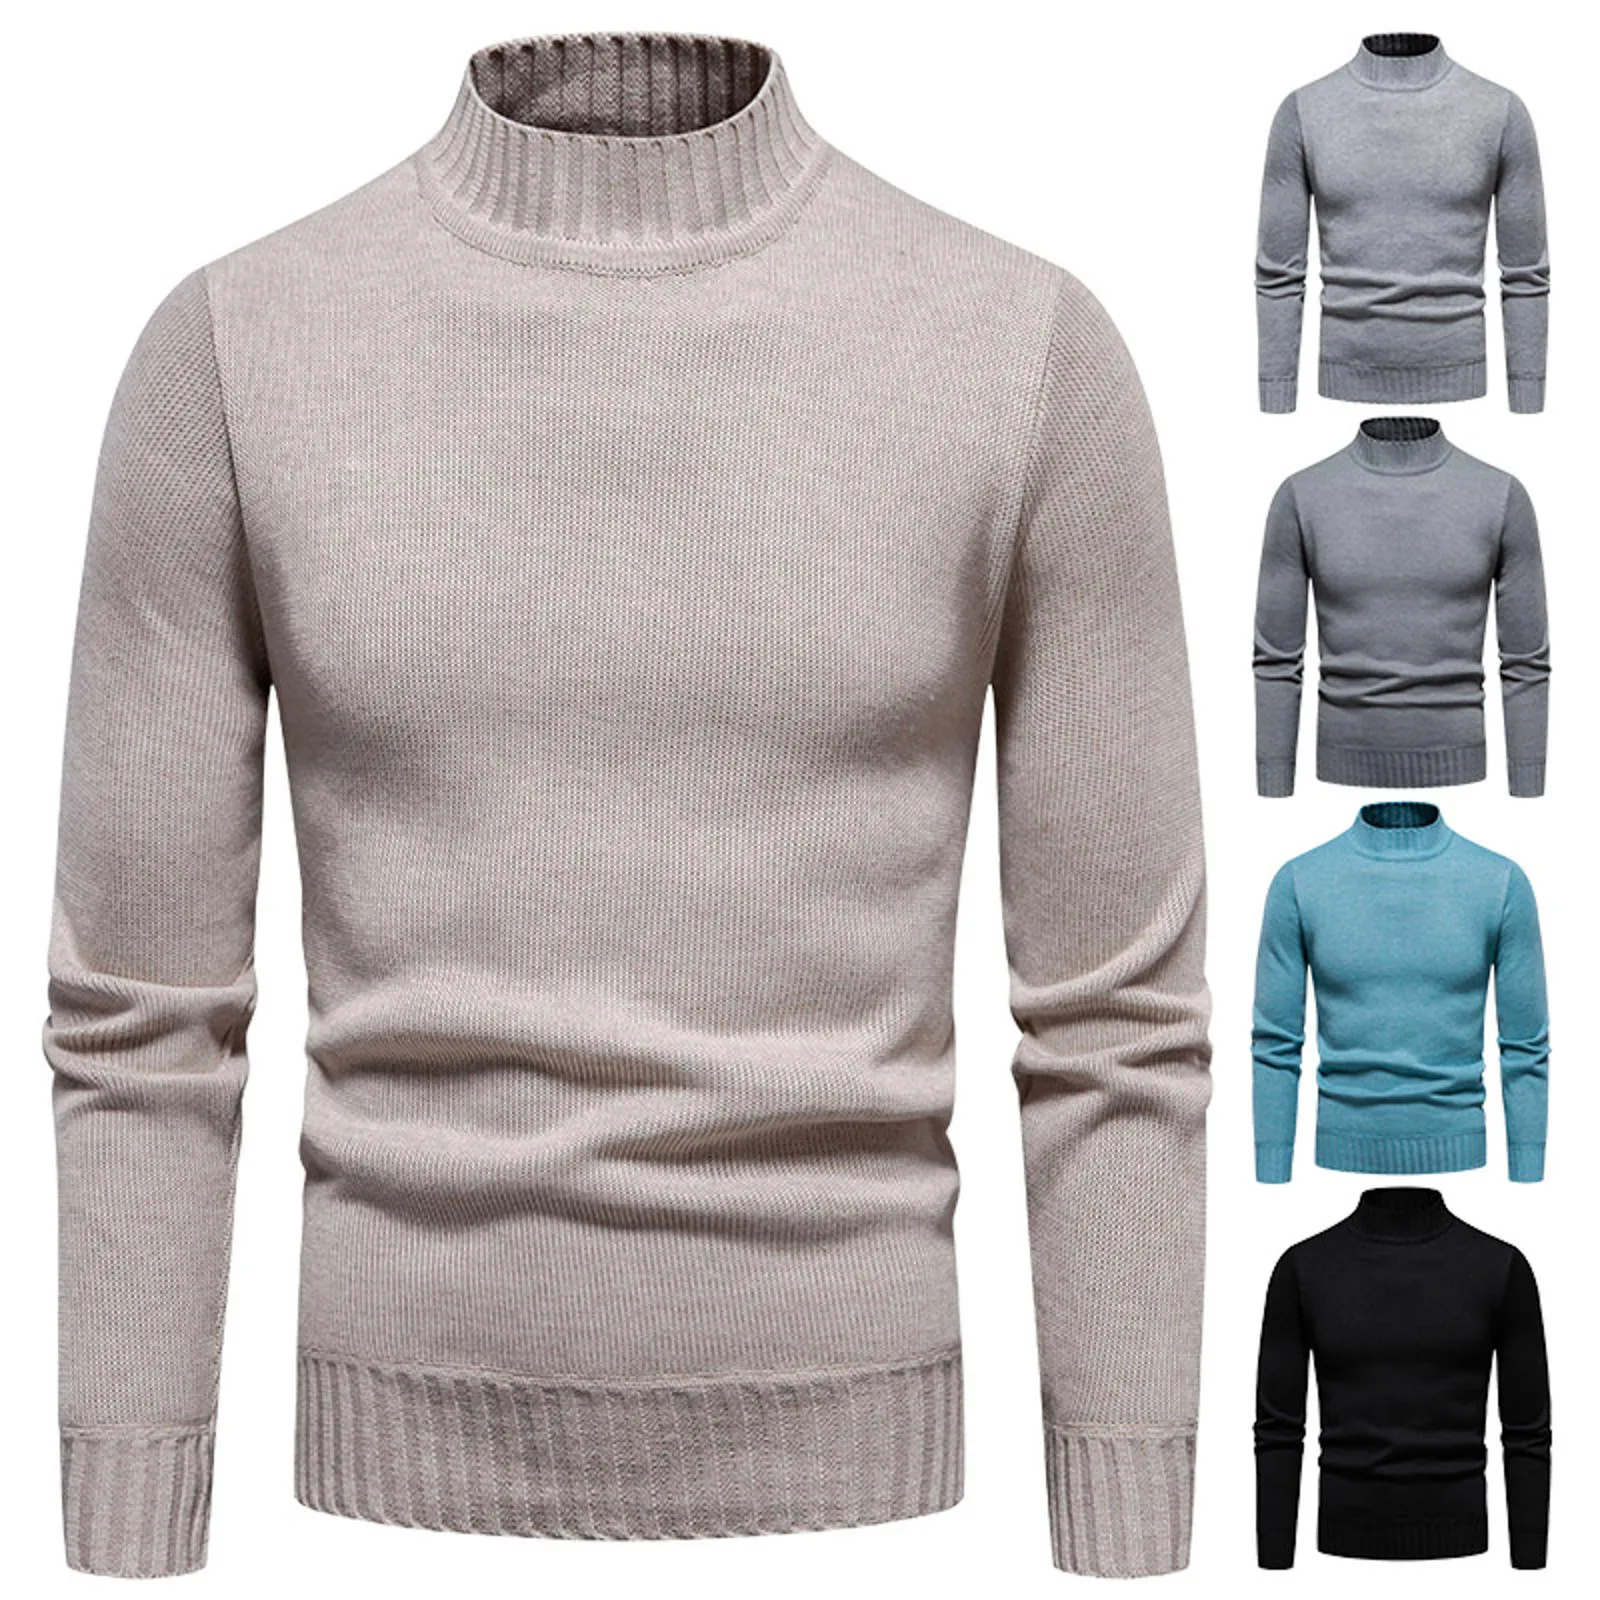 

Mens Winter Trend With Pile Thickened Warm Semi Turtleneck Bottom Knit Sweater Knitted Sweater Outerwear Sweaters